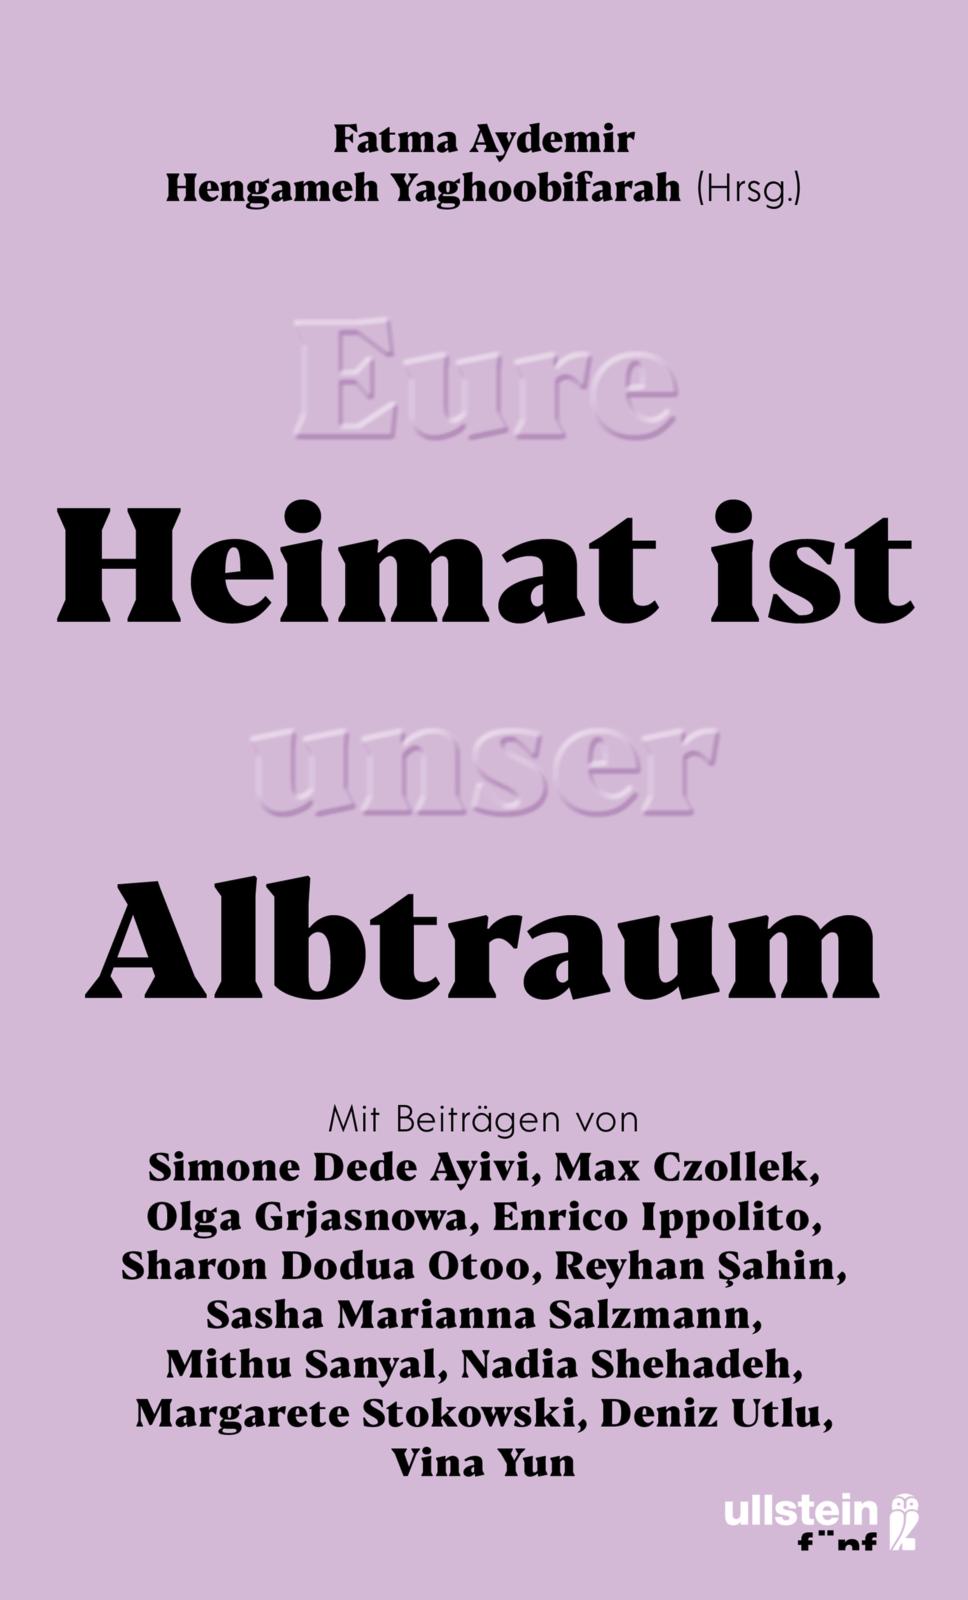 Cover of "Eure Heimat ist unser Albtraum" - Your homeland is our nightmare (published in German by Ullstein)